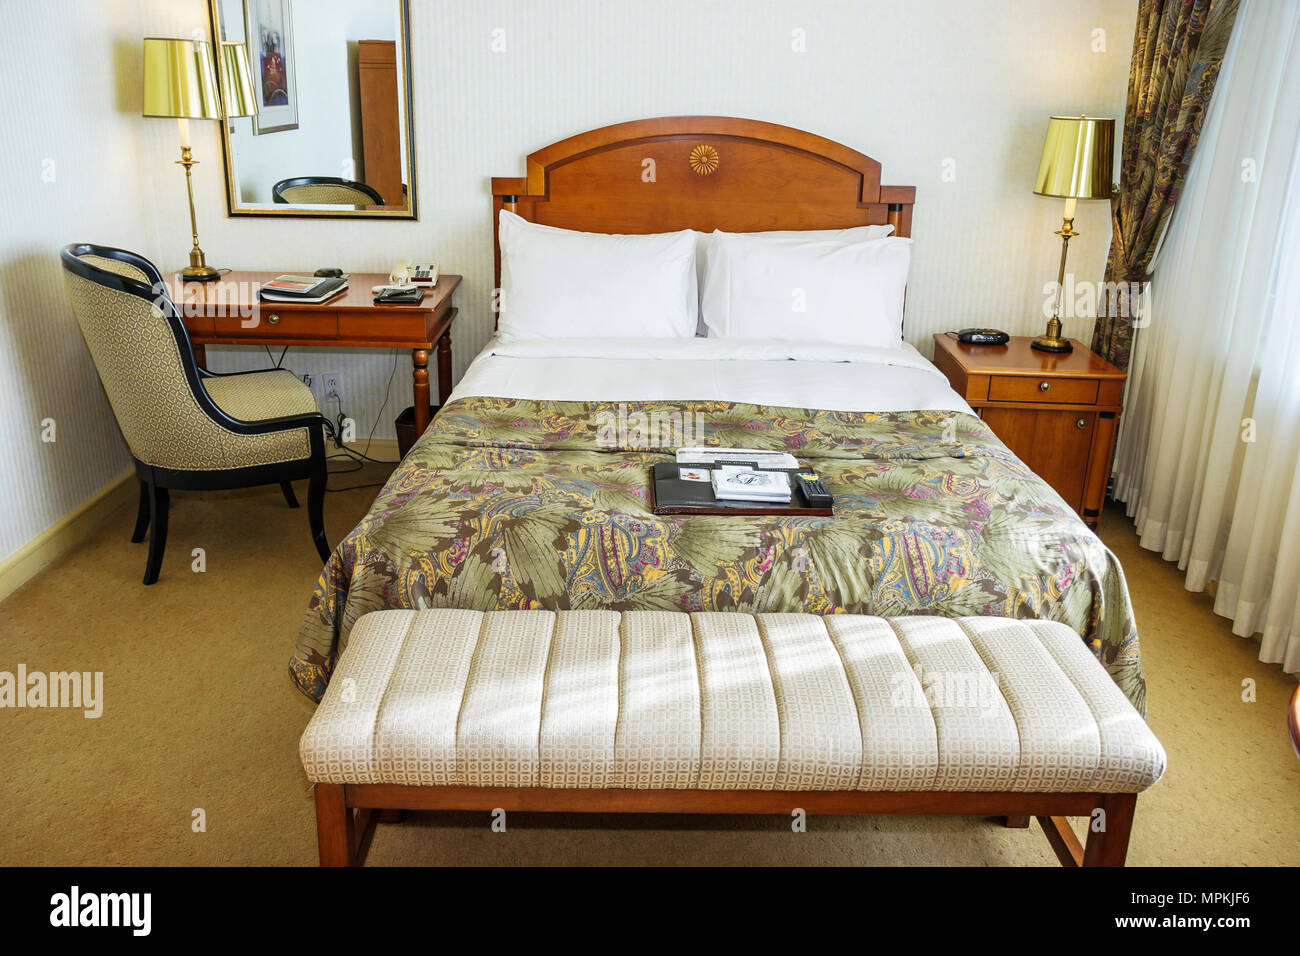 Montreal Canada,Quebec Province,Fairmont Queen Elizabeth,hotel,model guest room,bed,furniture,lodging,Canada070706125 Stock Photo